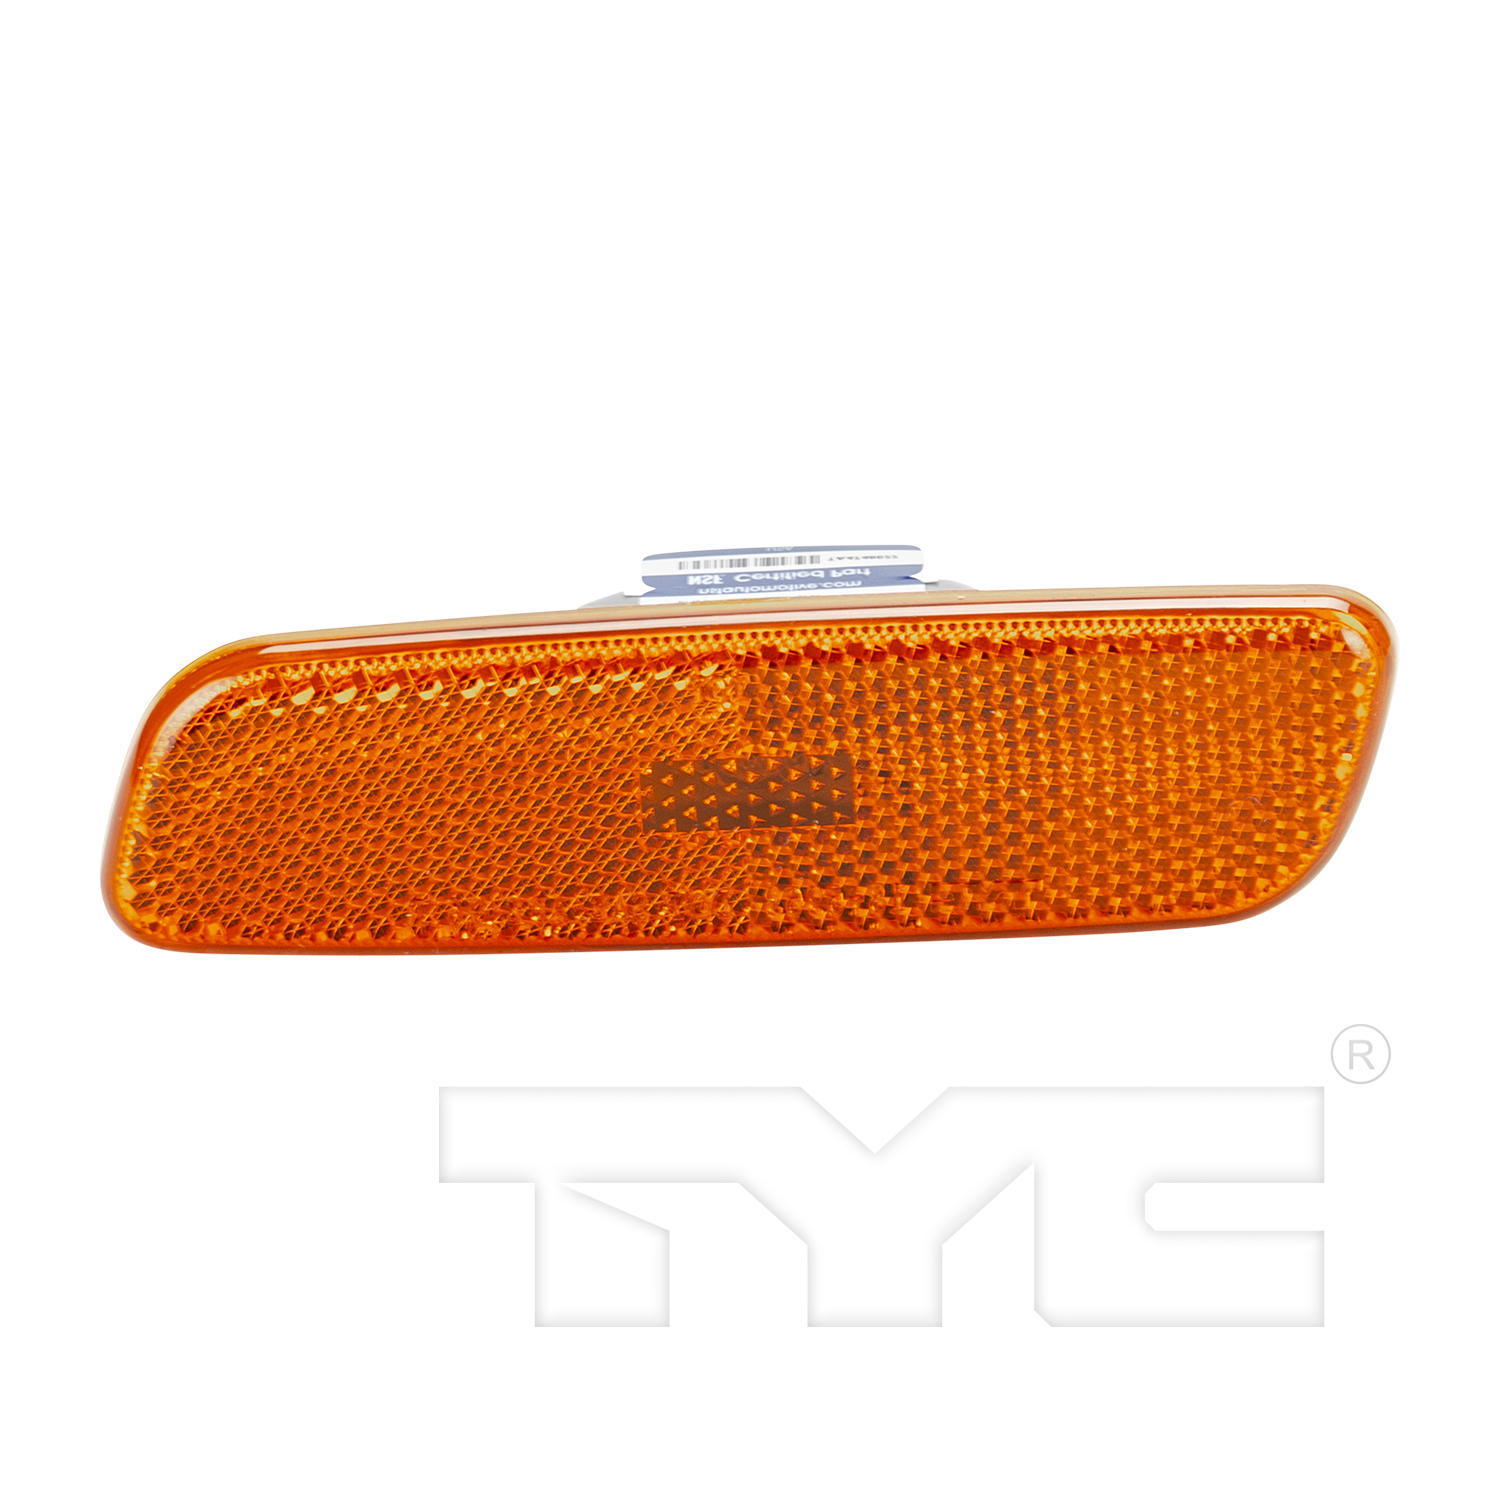 Aftermarket LAMPS for LEXUS - IS300, IS300,01-04,LT Front marker lamp assy